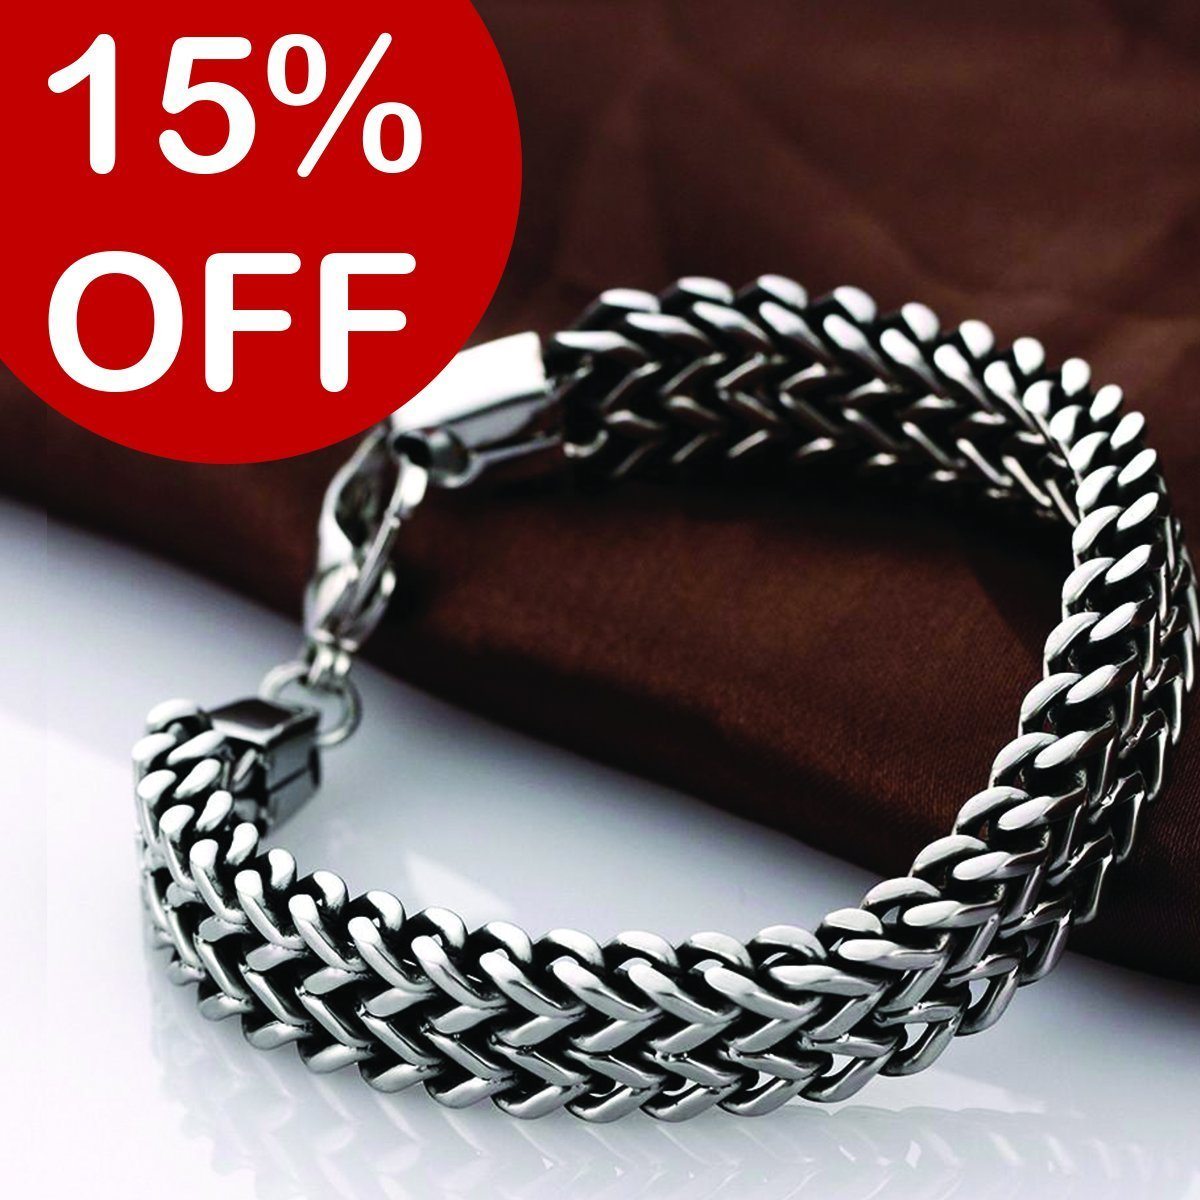 A Stainless Steel Double Side Snake Chain Bracelet with the words 15 % off on it.